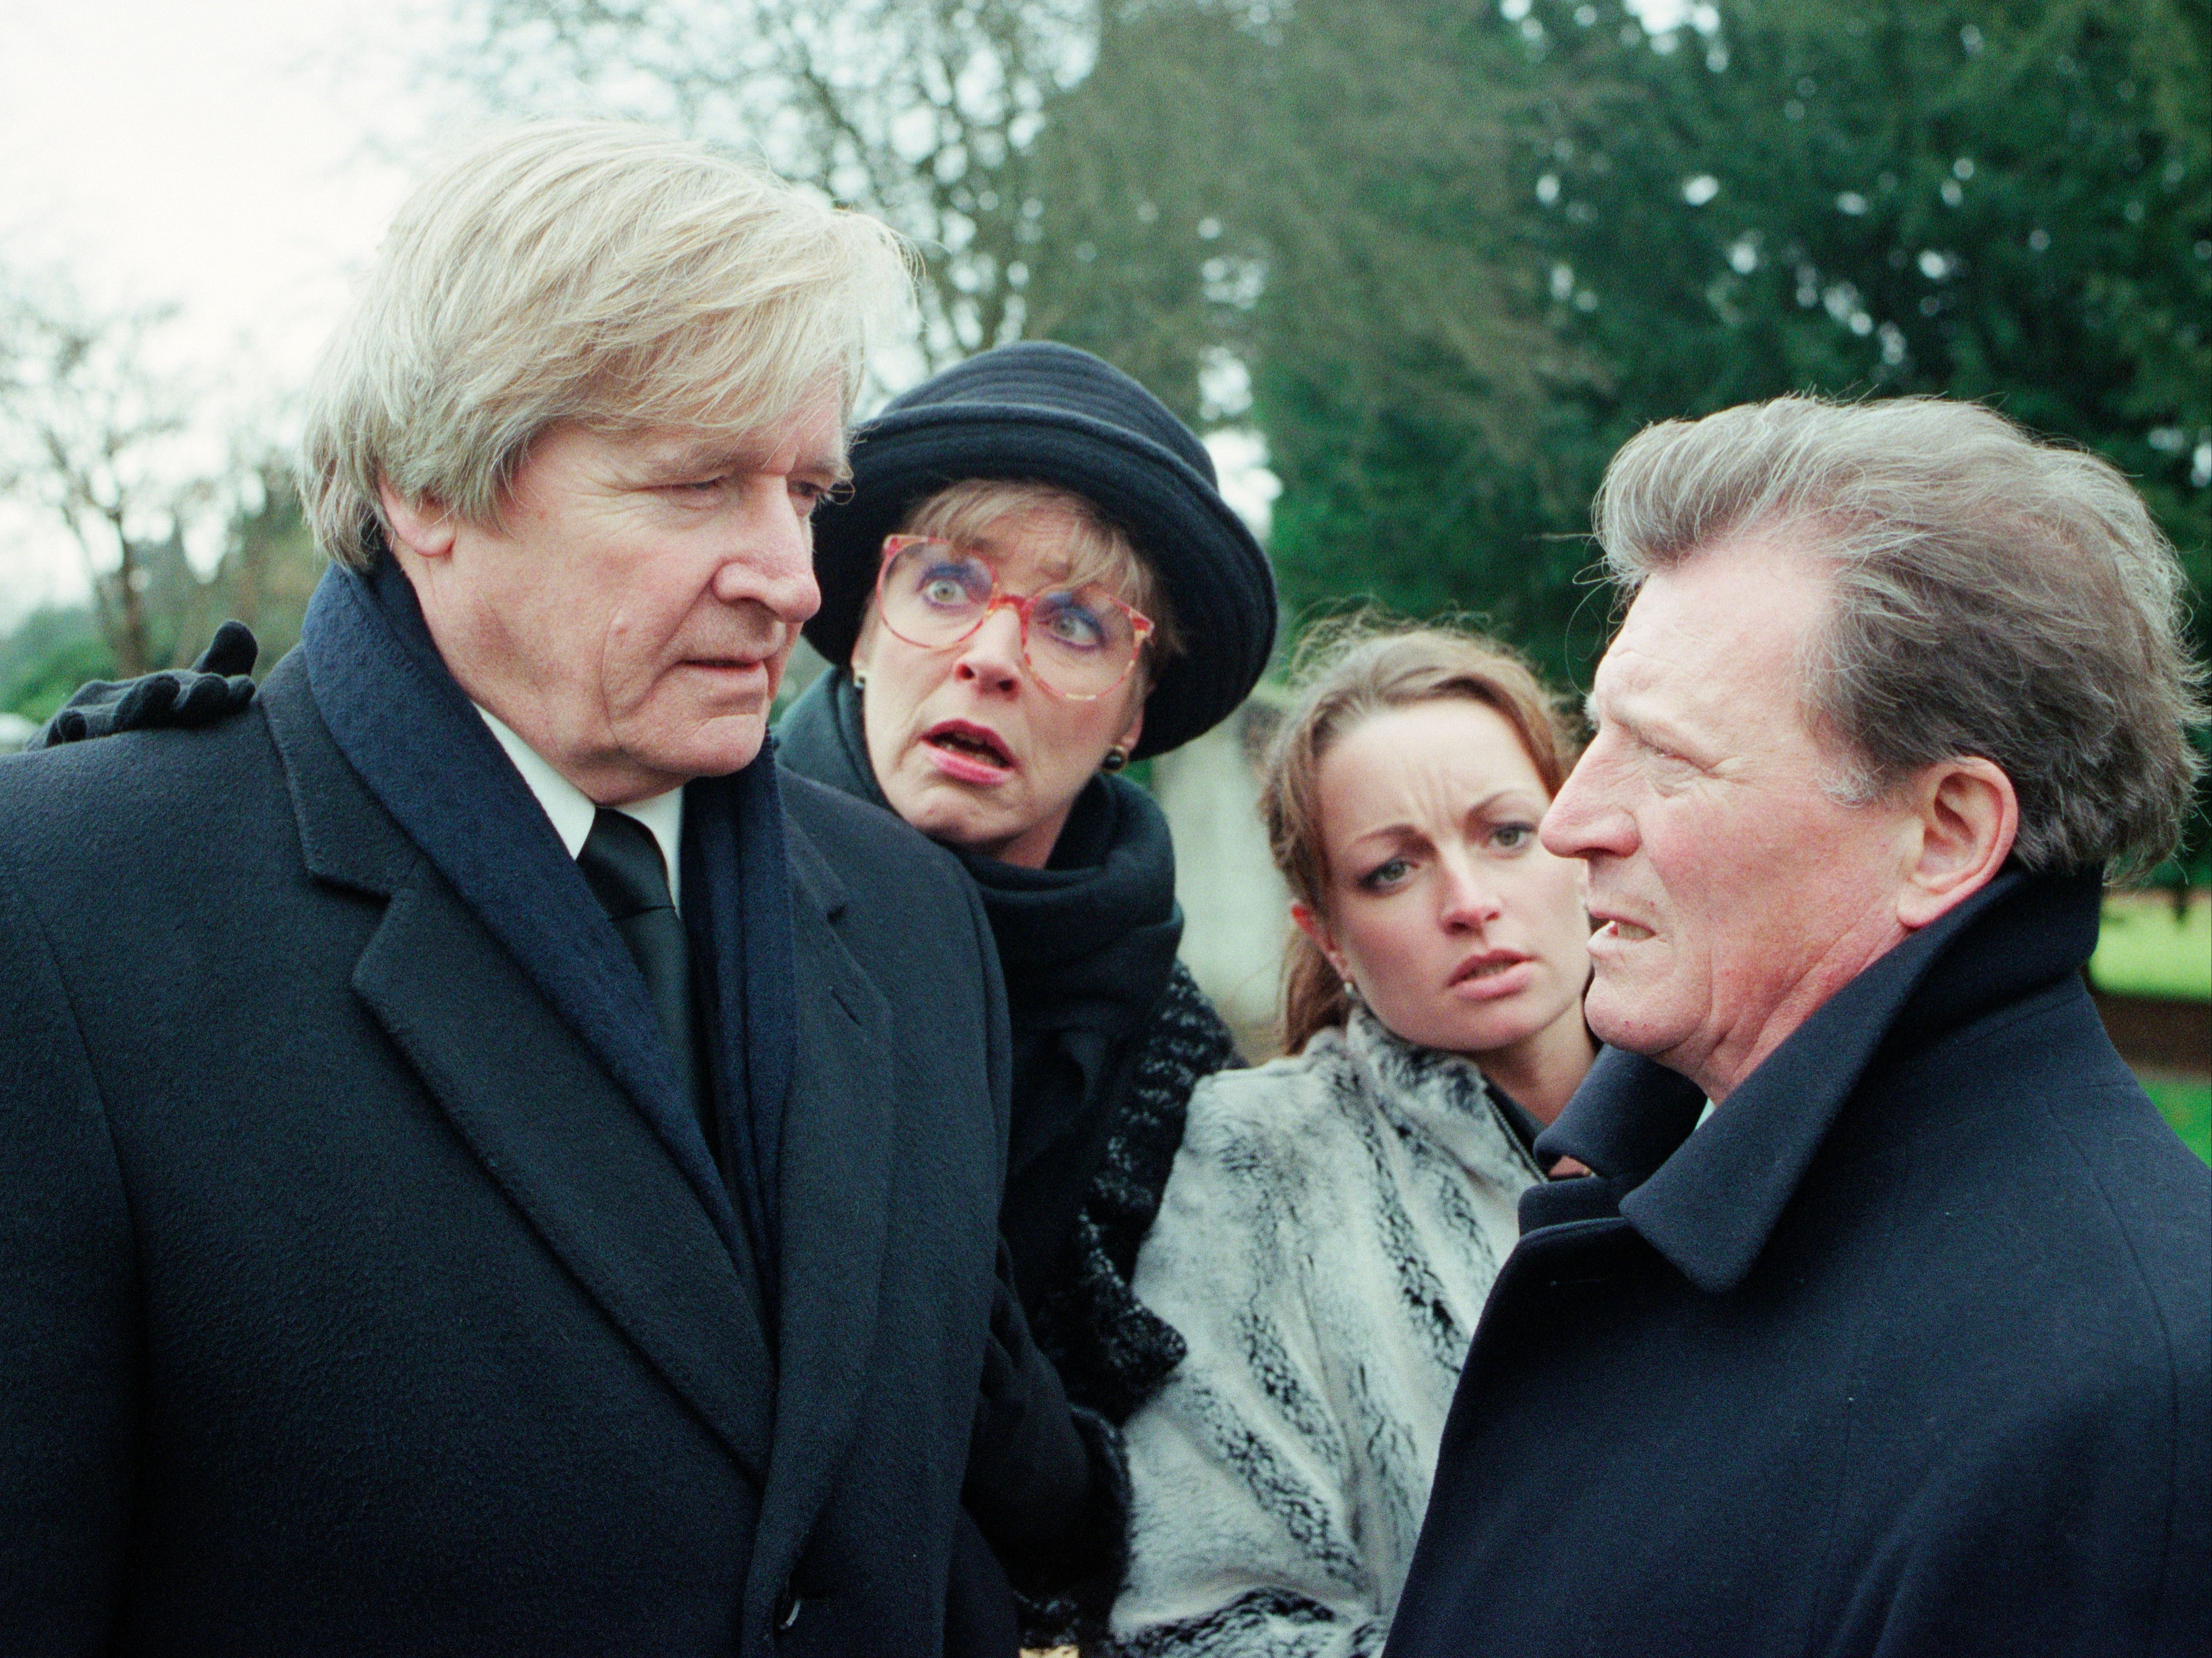 Squaring off: Ken and Mike were longtime enemies over their fight for Deirdre’s affections